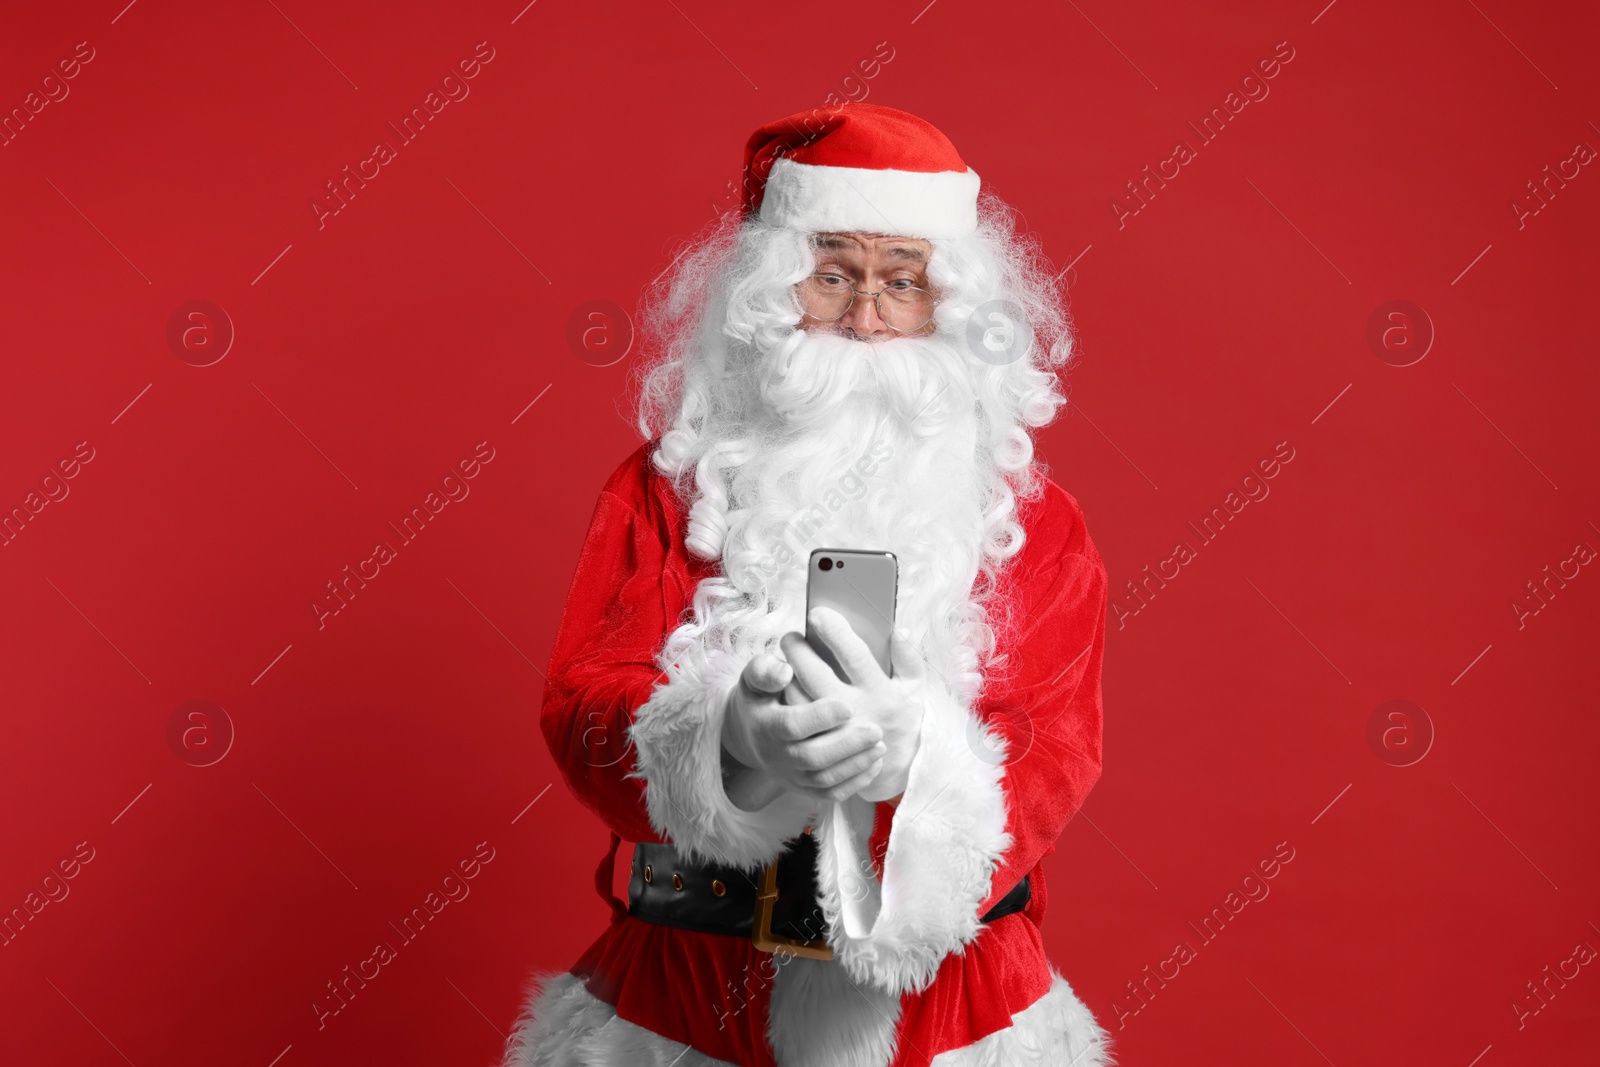 Photo of Merry Christmas. Santa Claus using smartphone on red background